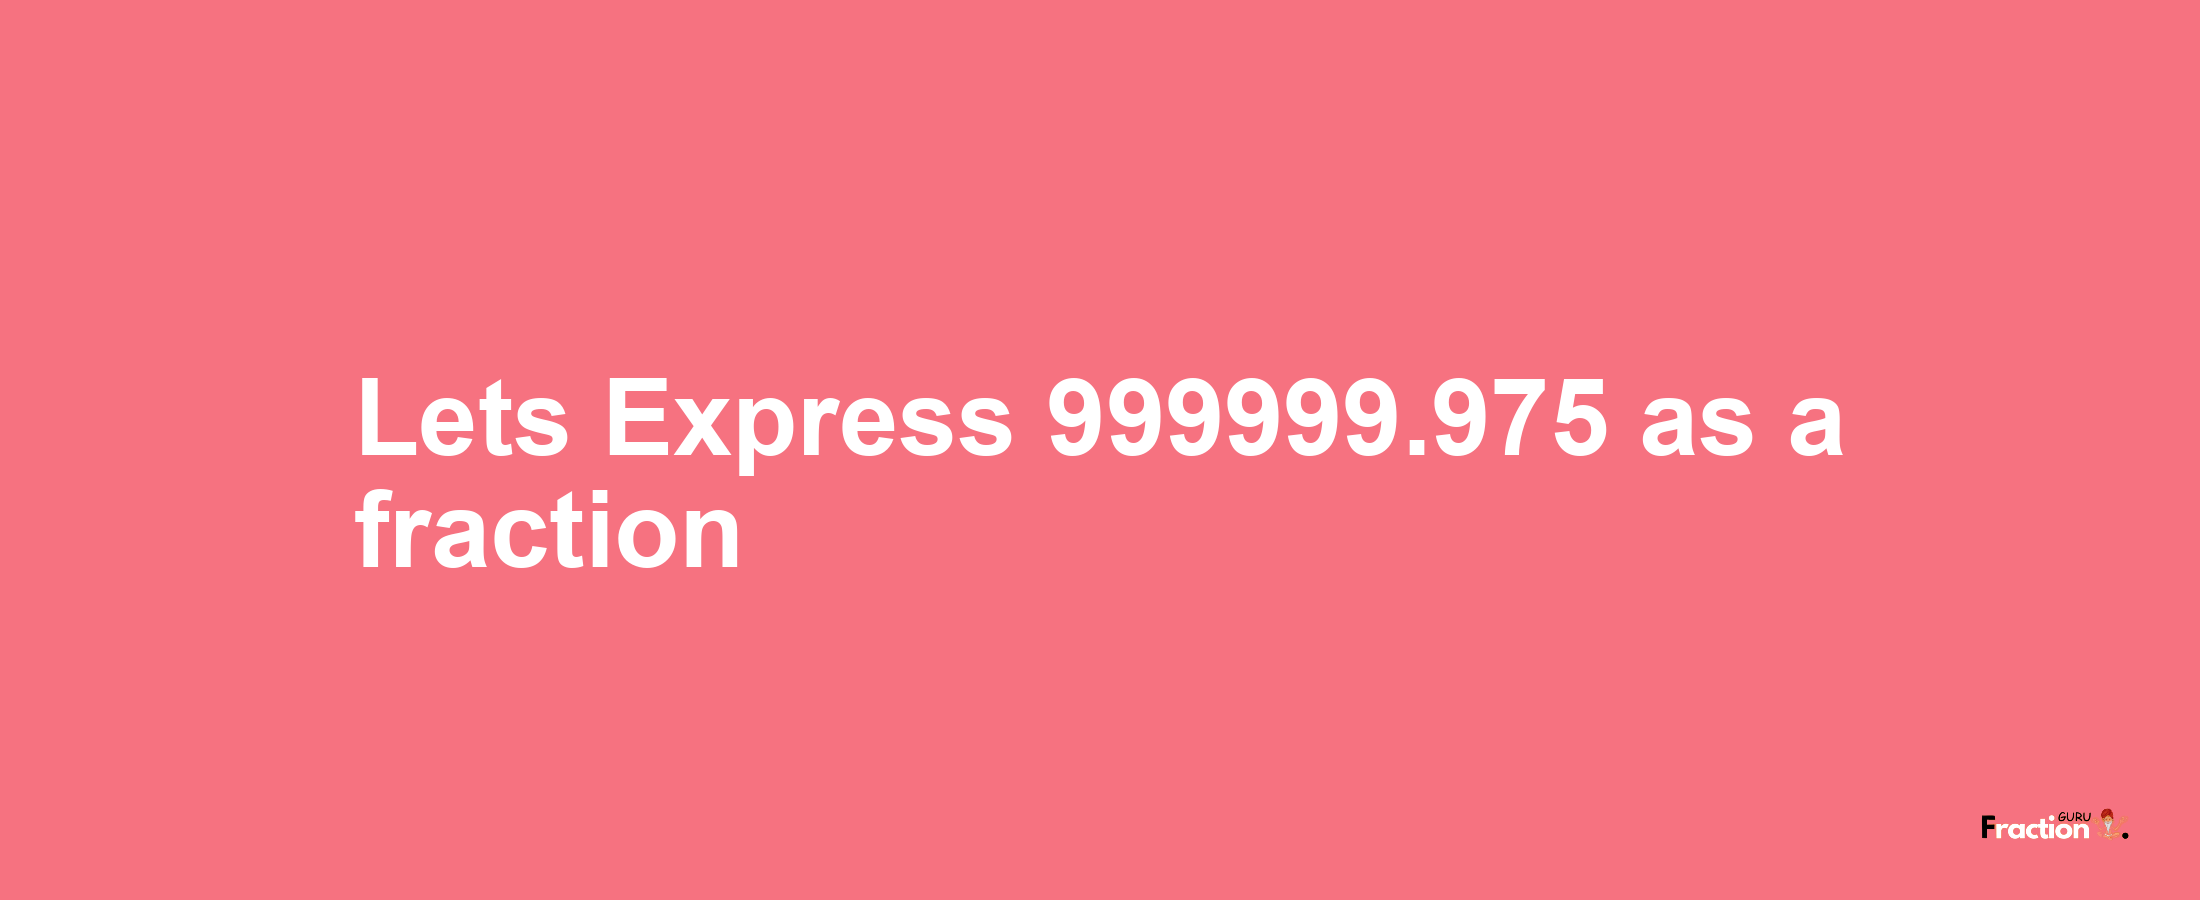 Lets Express 999999.975 as afraction